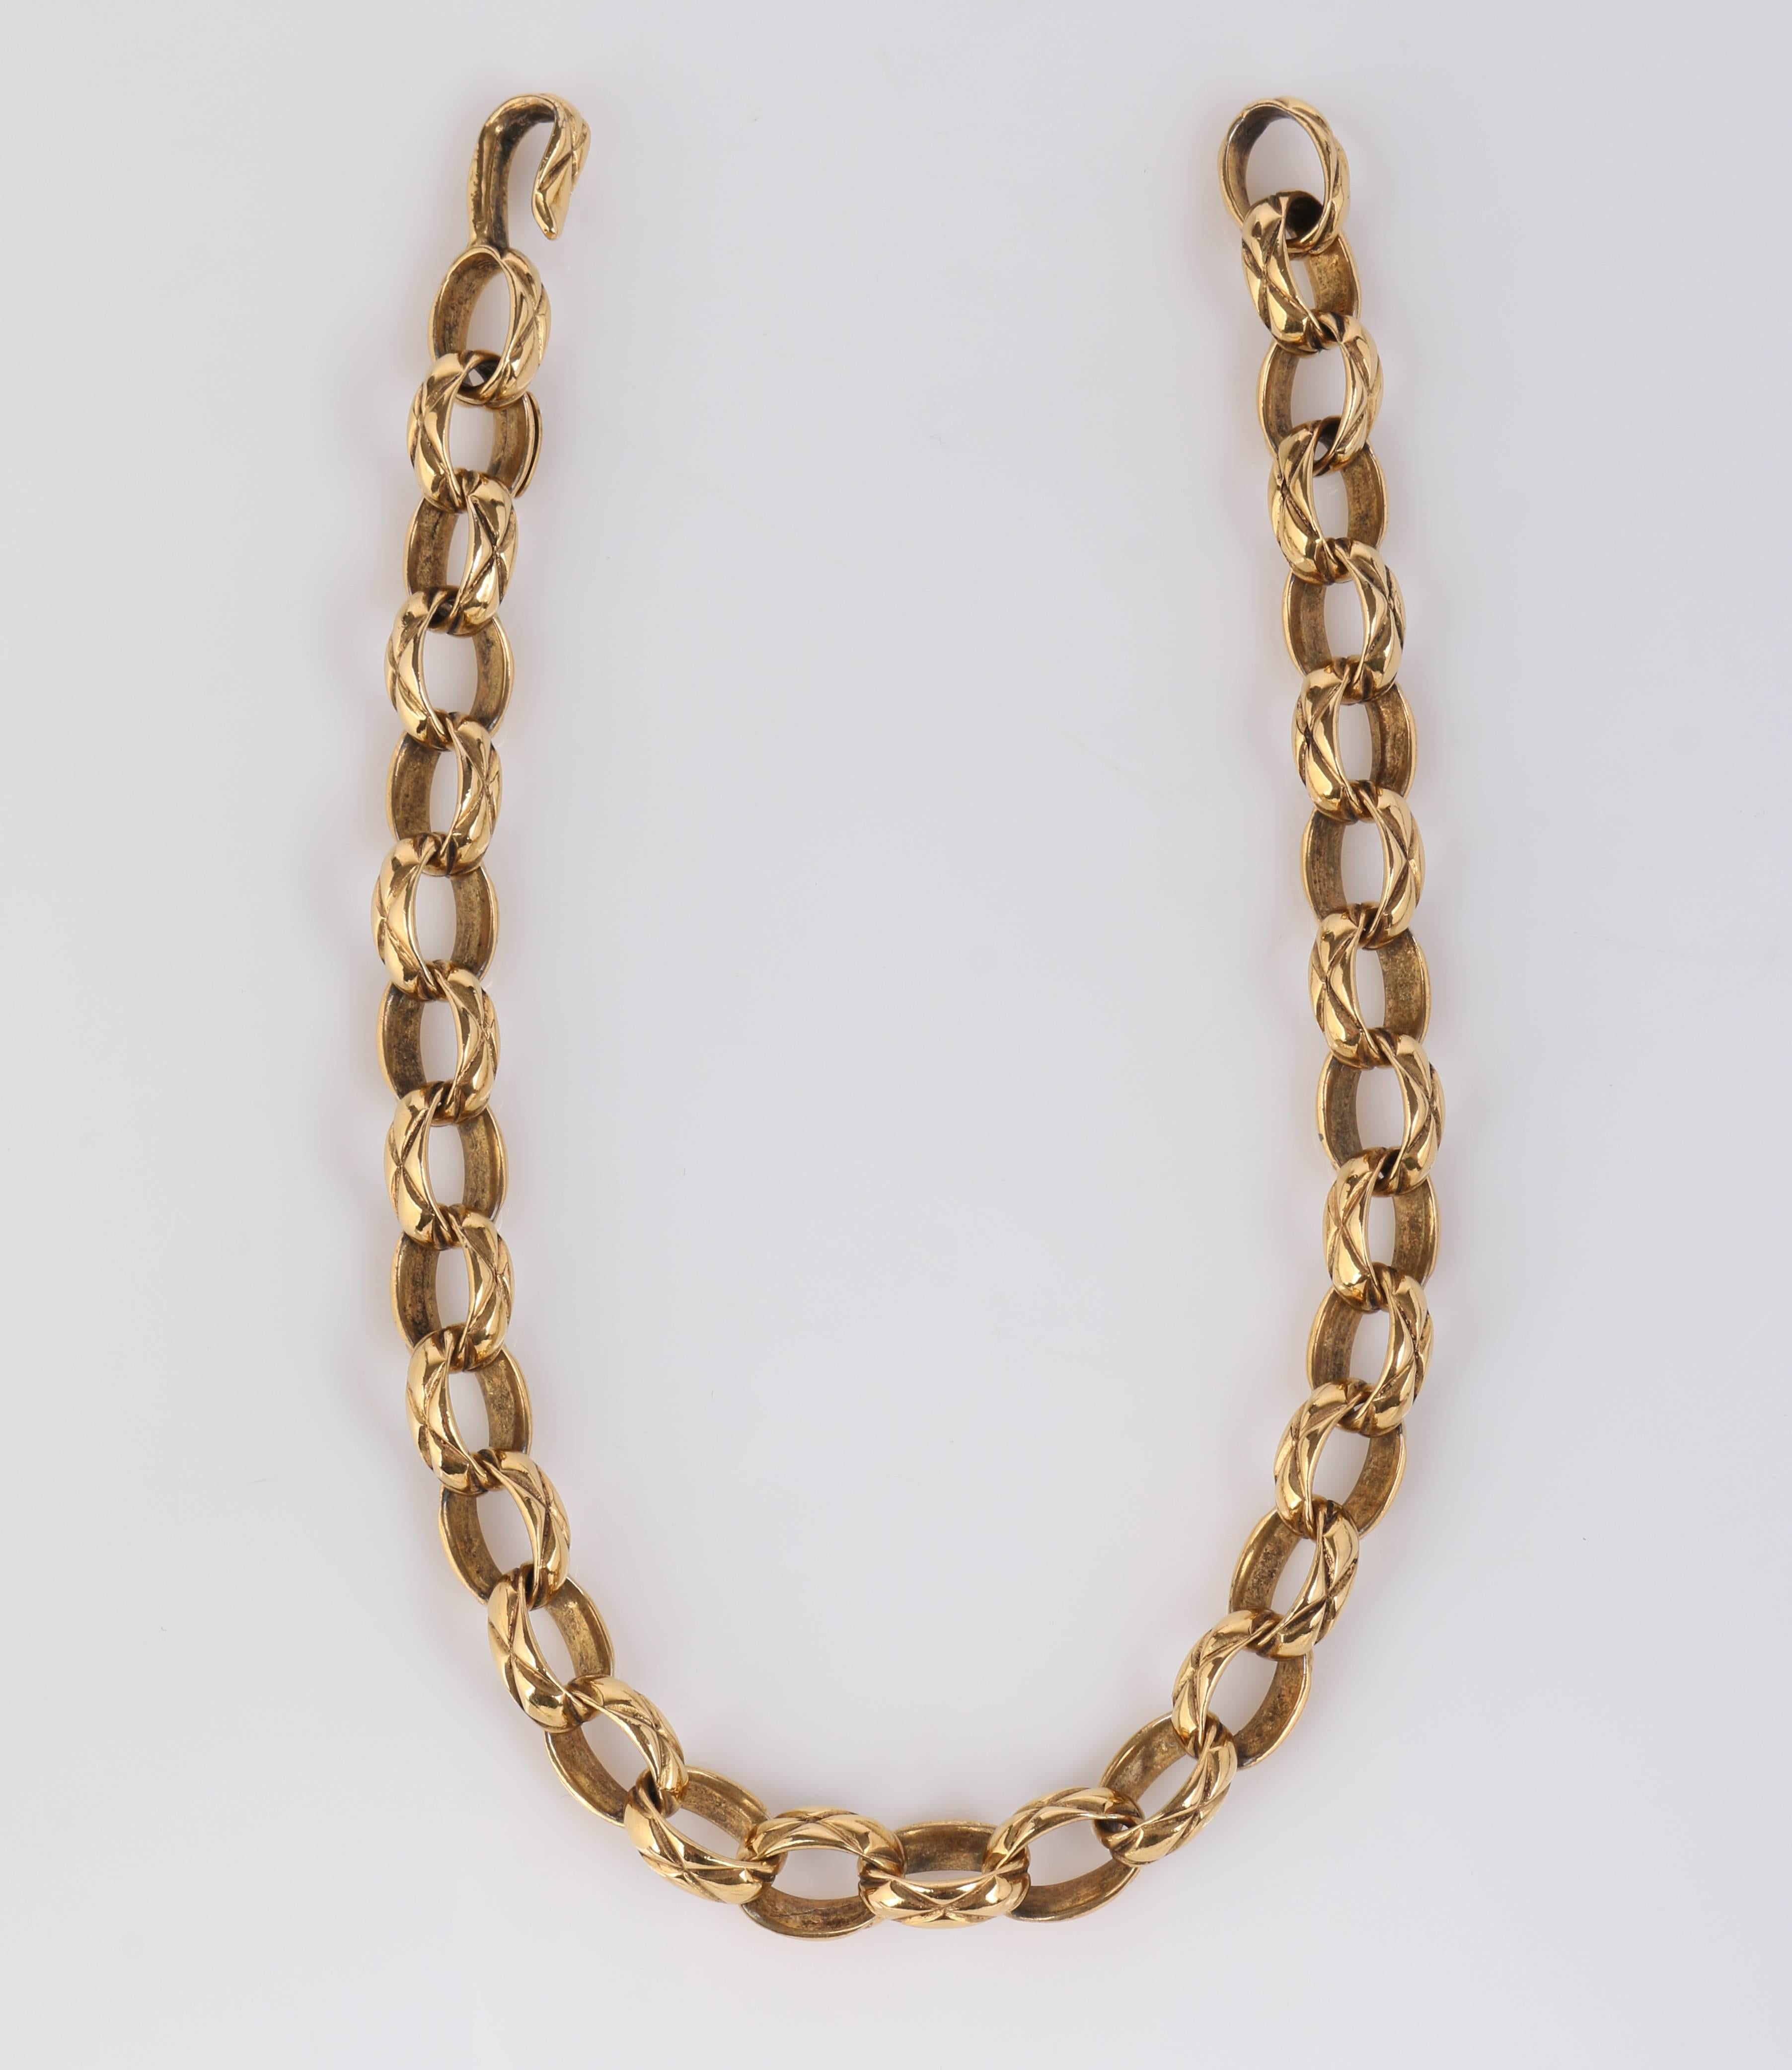 Women's CHANEL c.1986 Season 23 Gold Heavy Oval Link Chain Quilted Grooved Necklace